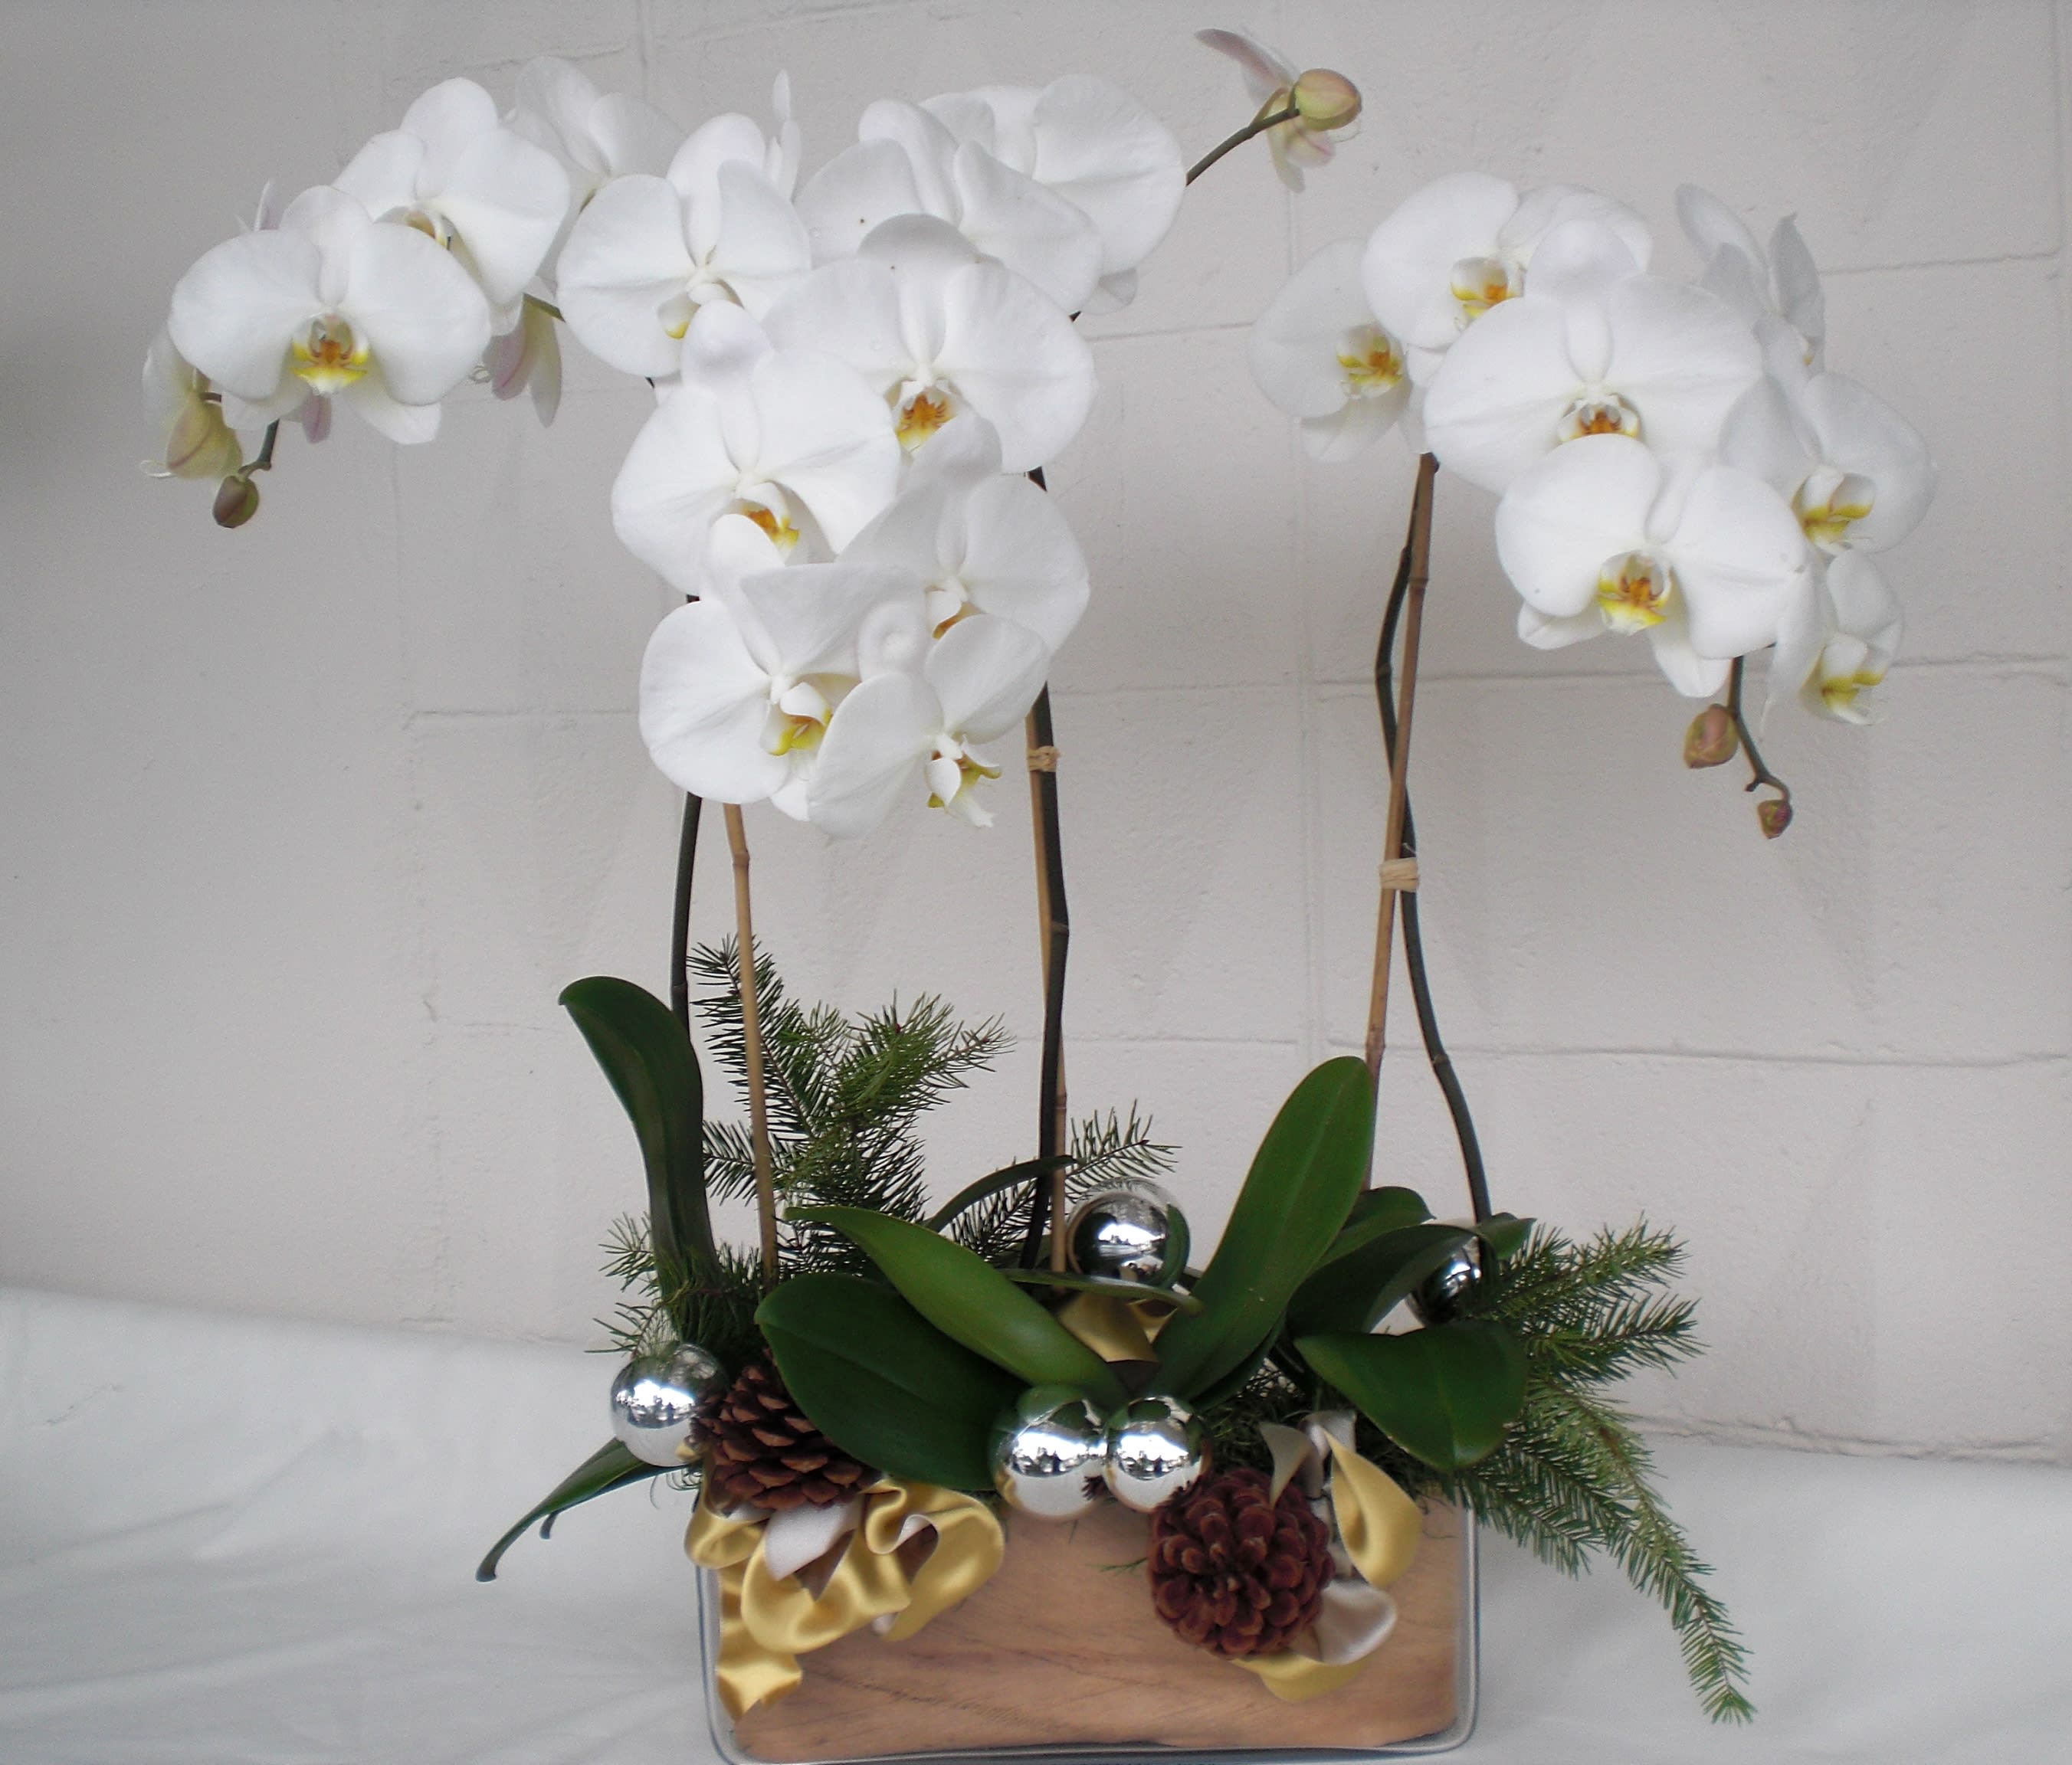 Holiday White Phalaenopsis Orchid - So simple, so elegant, the classic white phalaenopsis in a stylish contemporary glass container lined with palm leafs and adorned with holiday ornaments and winter greens  